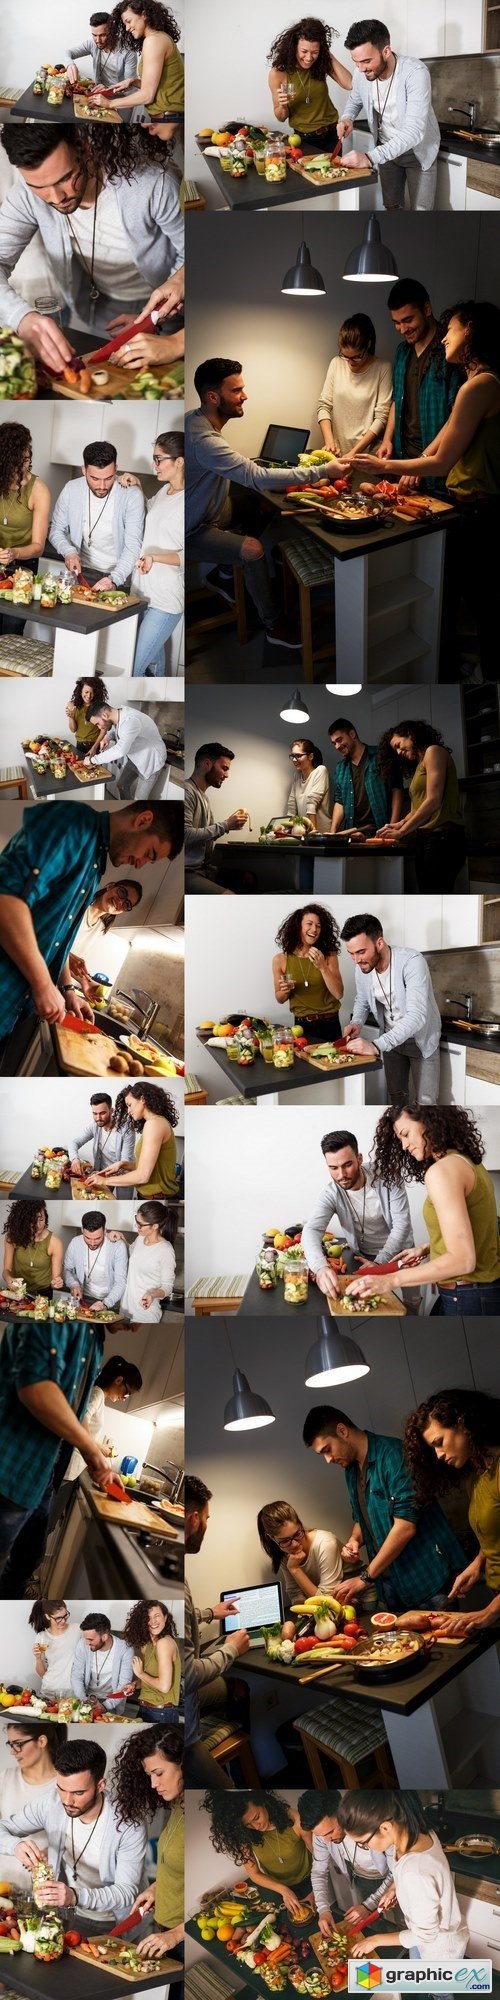 Young couple in kitchen preparing together